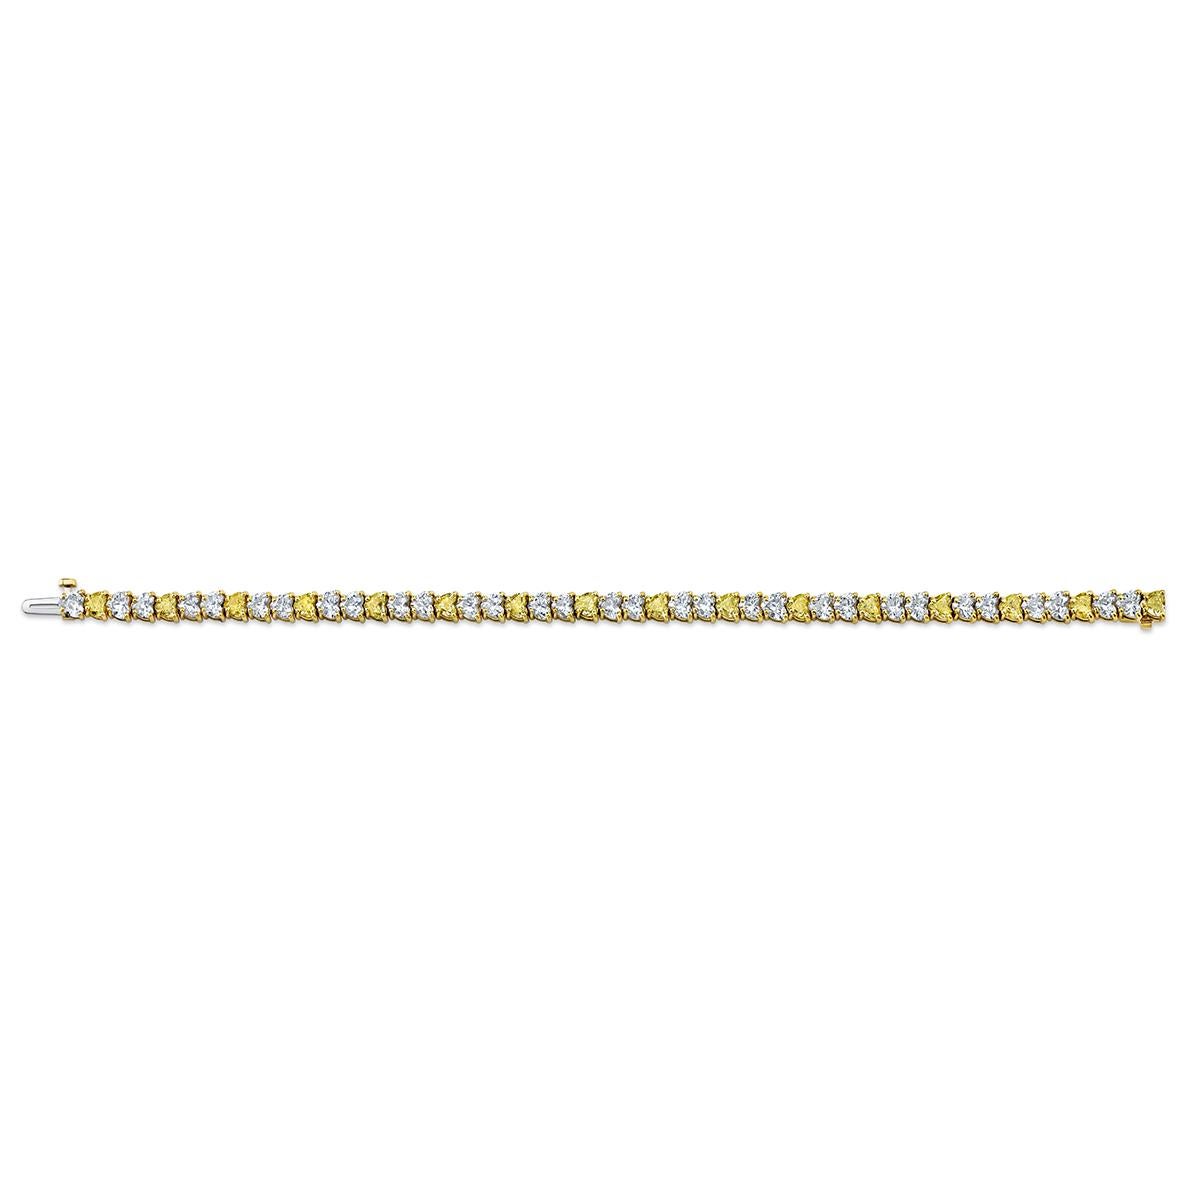 Elegant 18k yellow gold bracelet adorned with 47 exquisite heart-shaped diamonds, totaling 11.69 carats. This stunning piece features a captivating arrangement of alternating natural yellow and white diamonds, creating a mesmerizing contrast. A